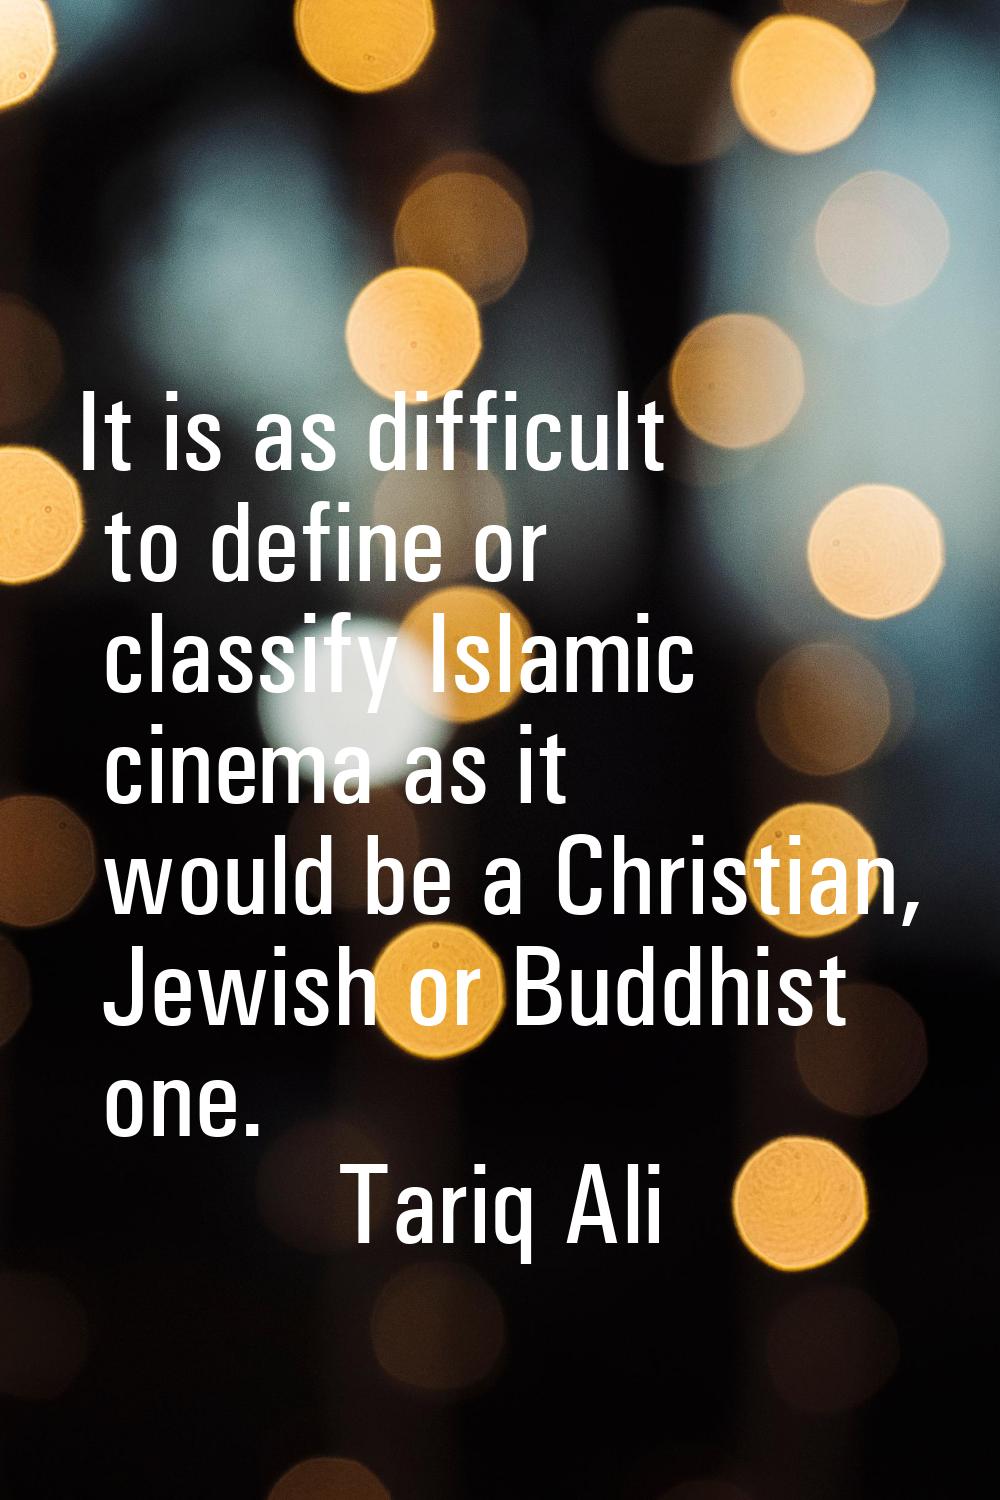 It is as difficult to define or classify Islamic cinema as it would be a Christian, Jewish or Buddh